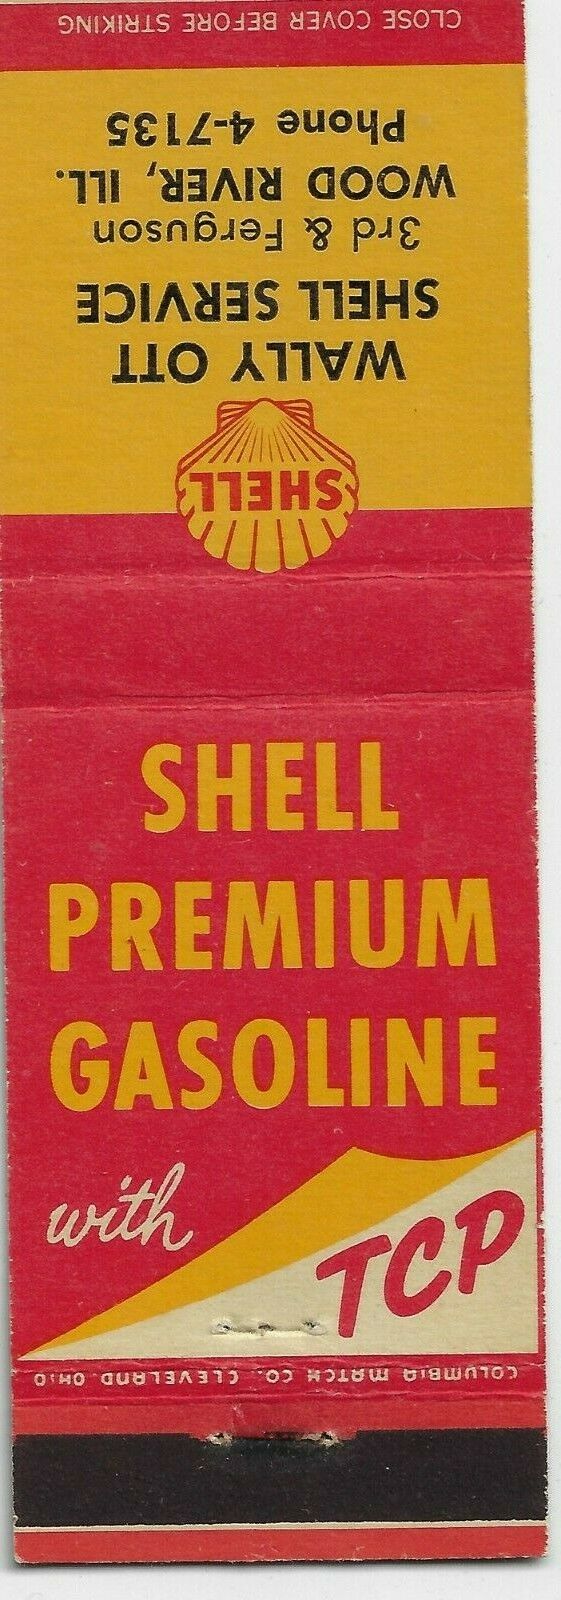 Front Strike Matchcover Premium Shell Service Wood River Ill. Tcp